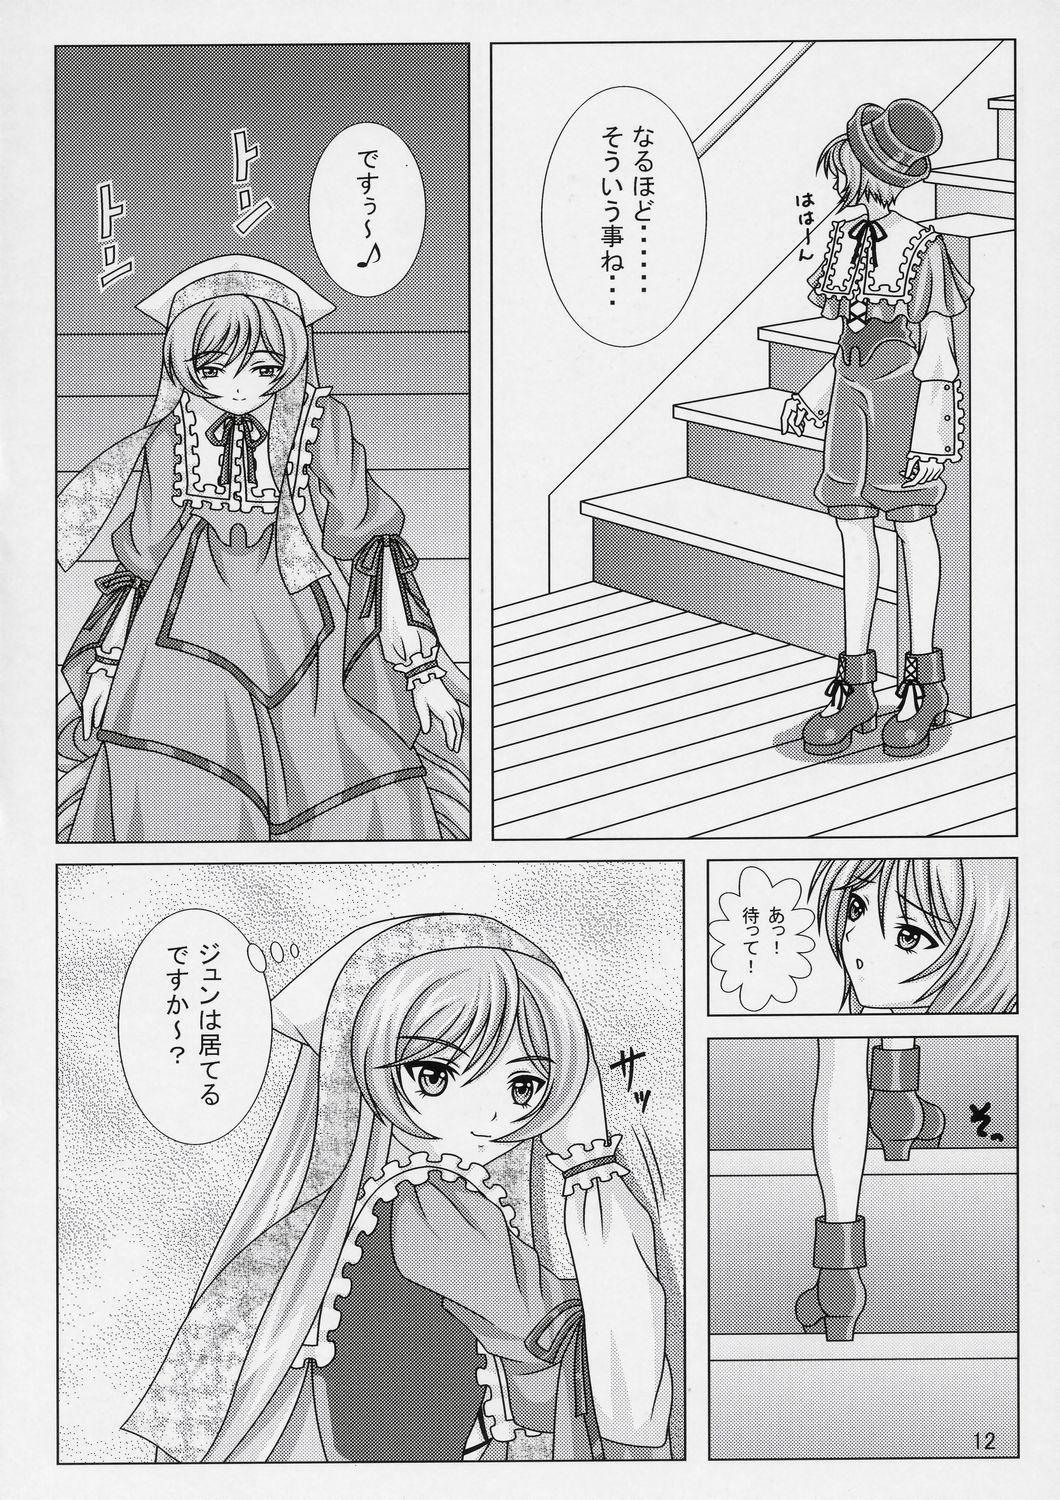 Speculum Lovely Dolls 2 - Rozen maiden Couples - Page 11